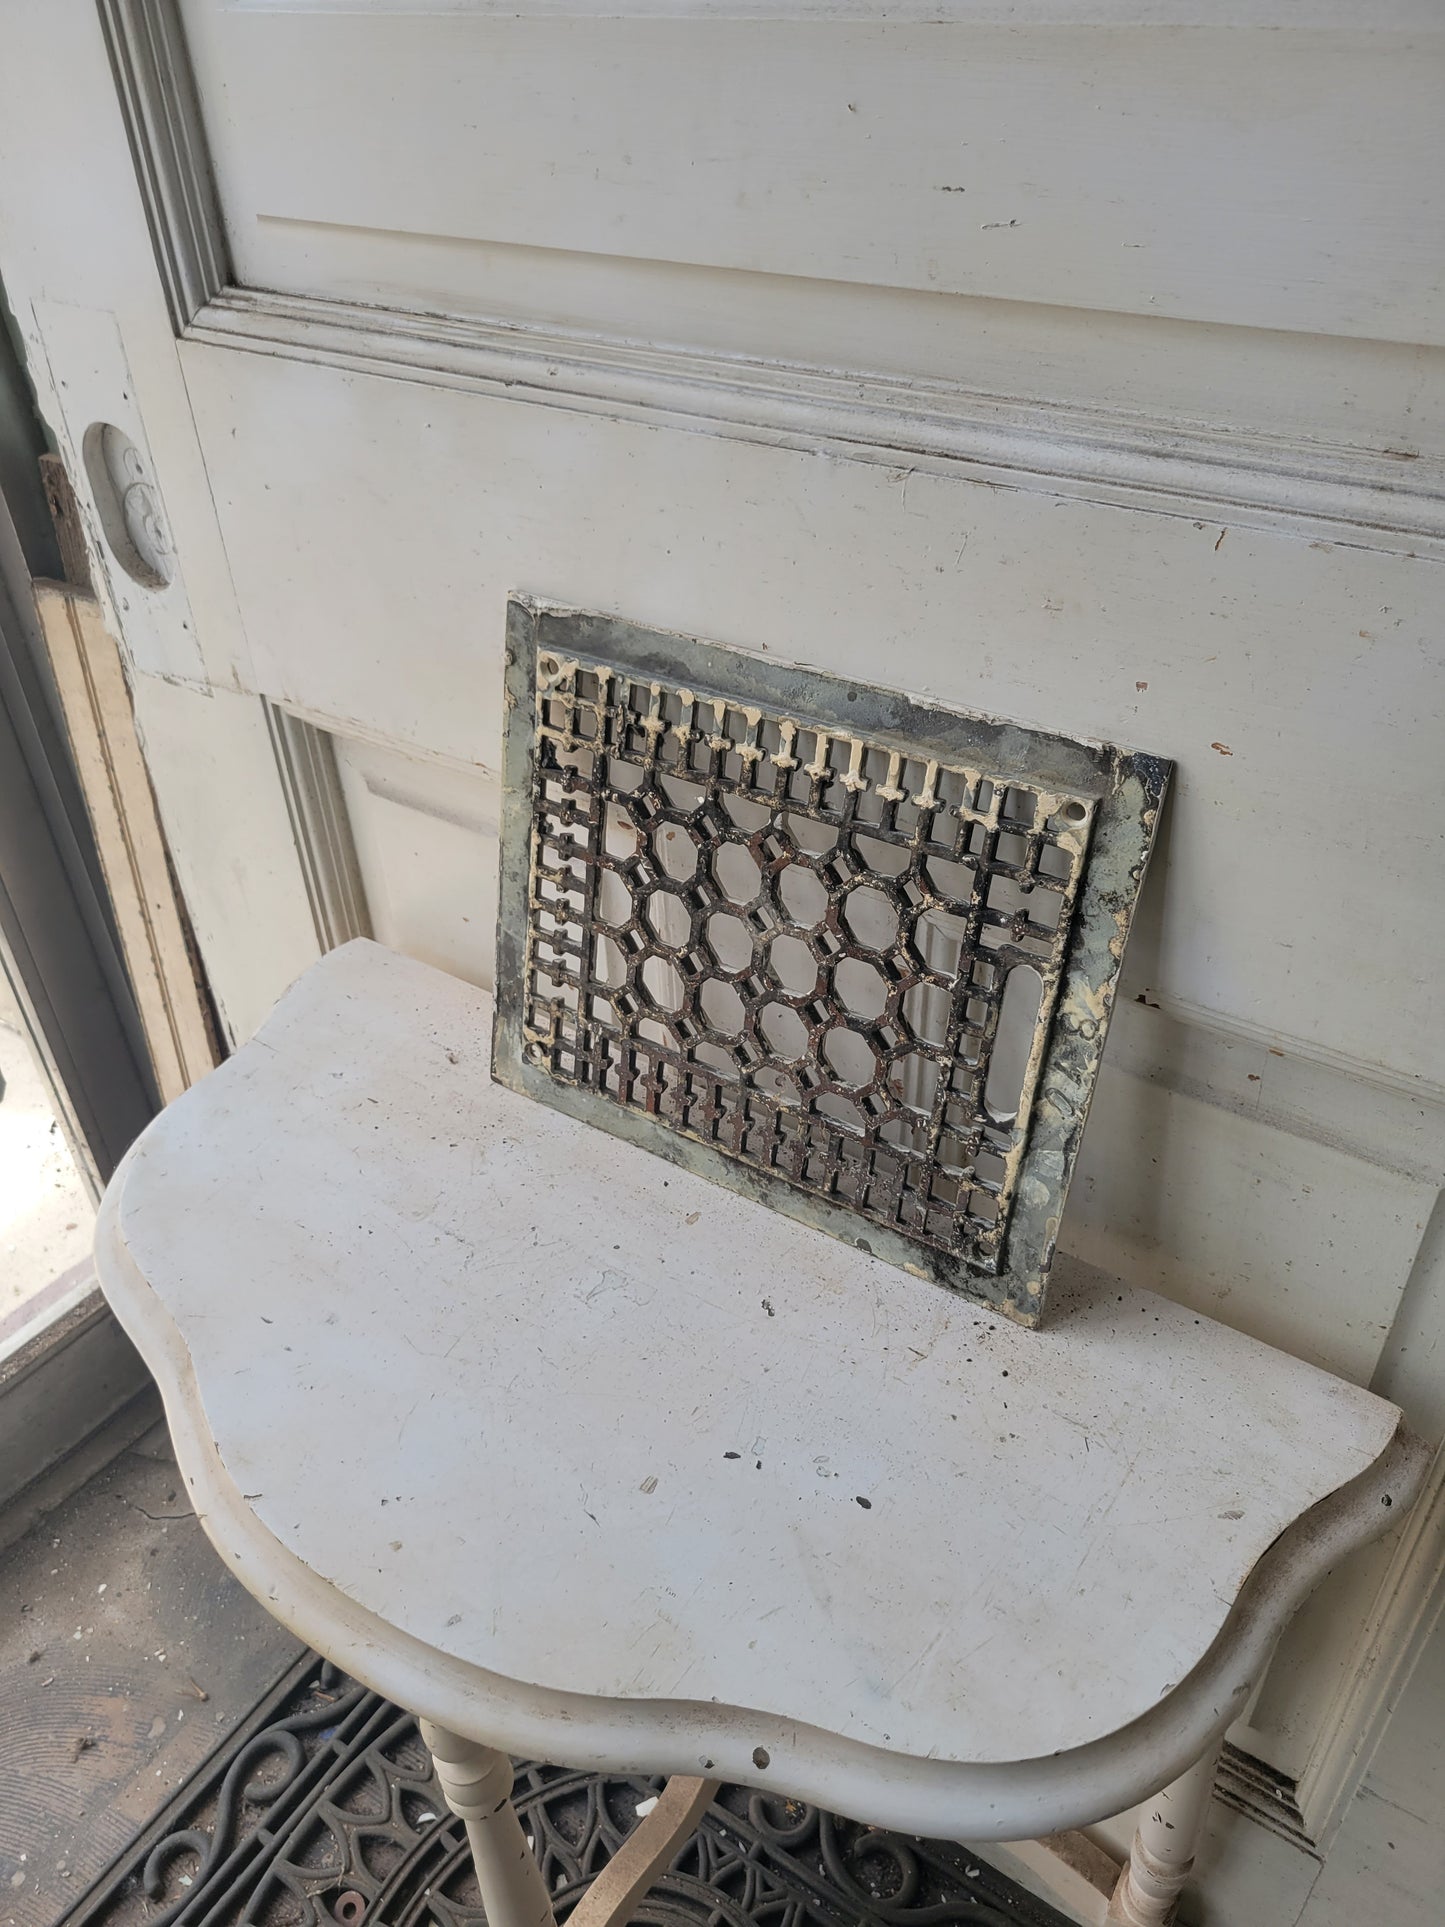 10 x 12 Ornate Cast Iron Register Cover with Honeycomb Design, Floor or Wall Mount Heat Register Grate #060622